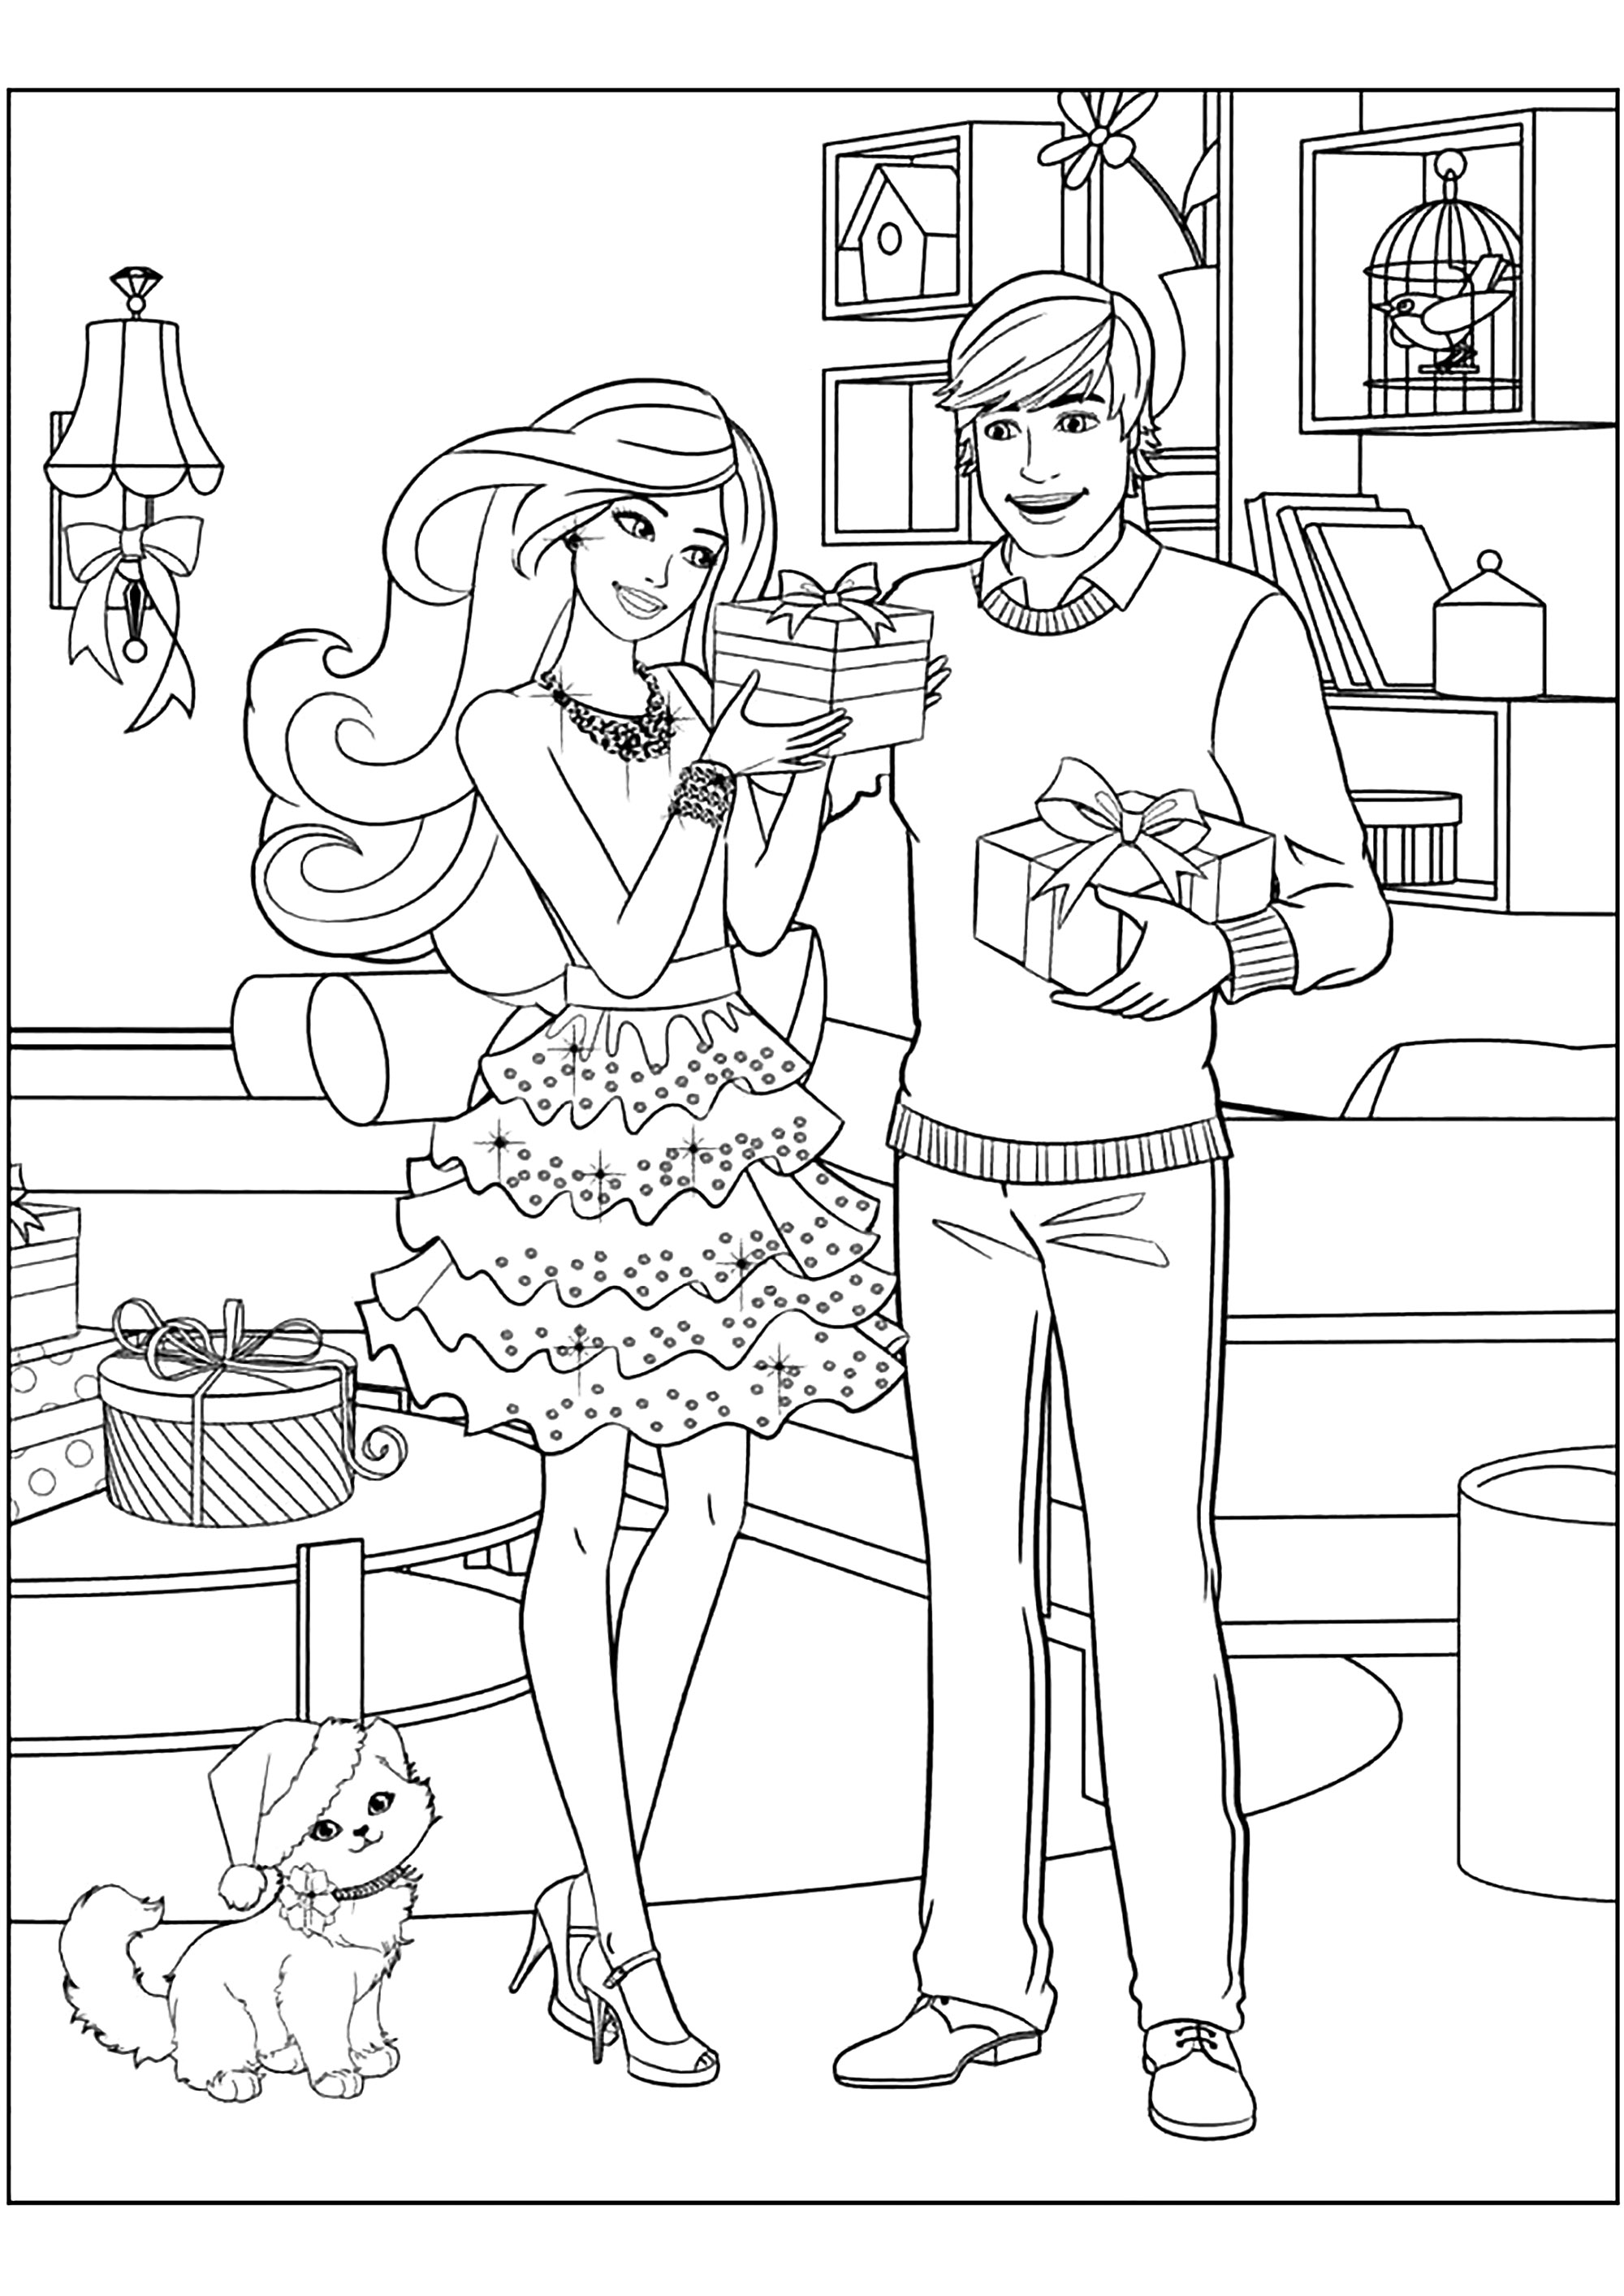 Ken and Barbie give each other gifts. Lots of details to color in this lovely coloring page with Barbie and Ken